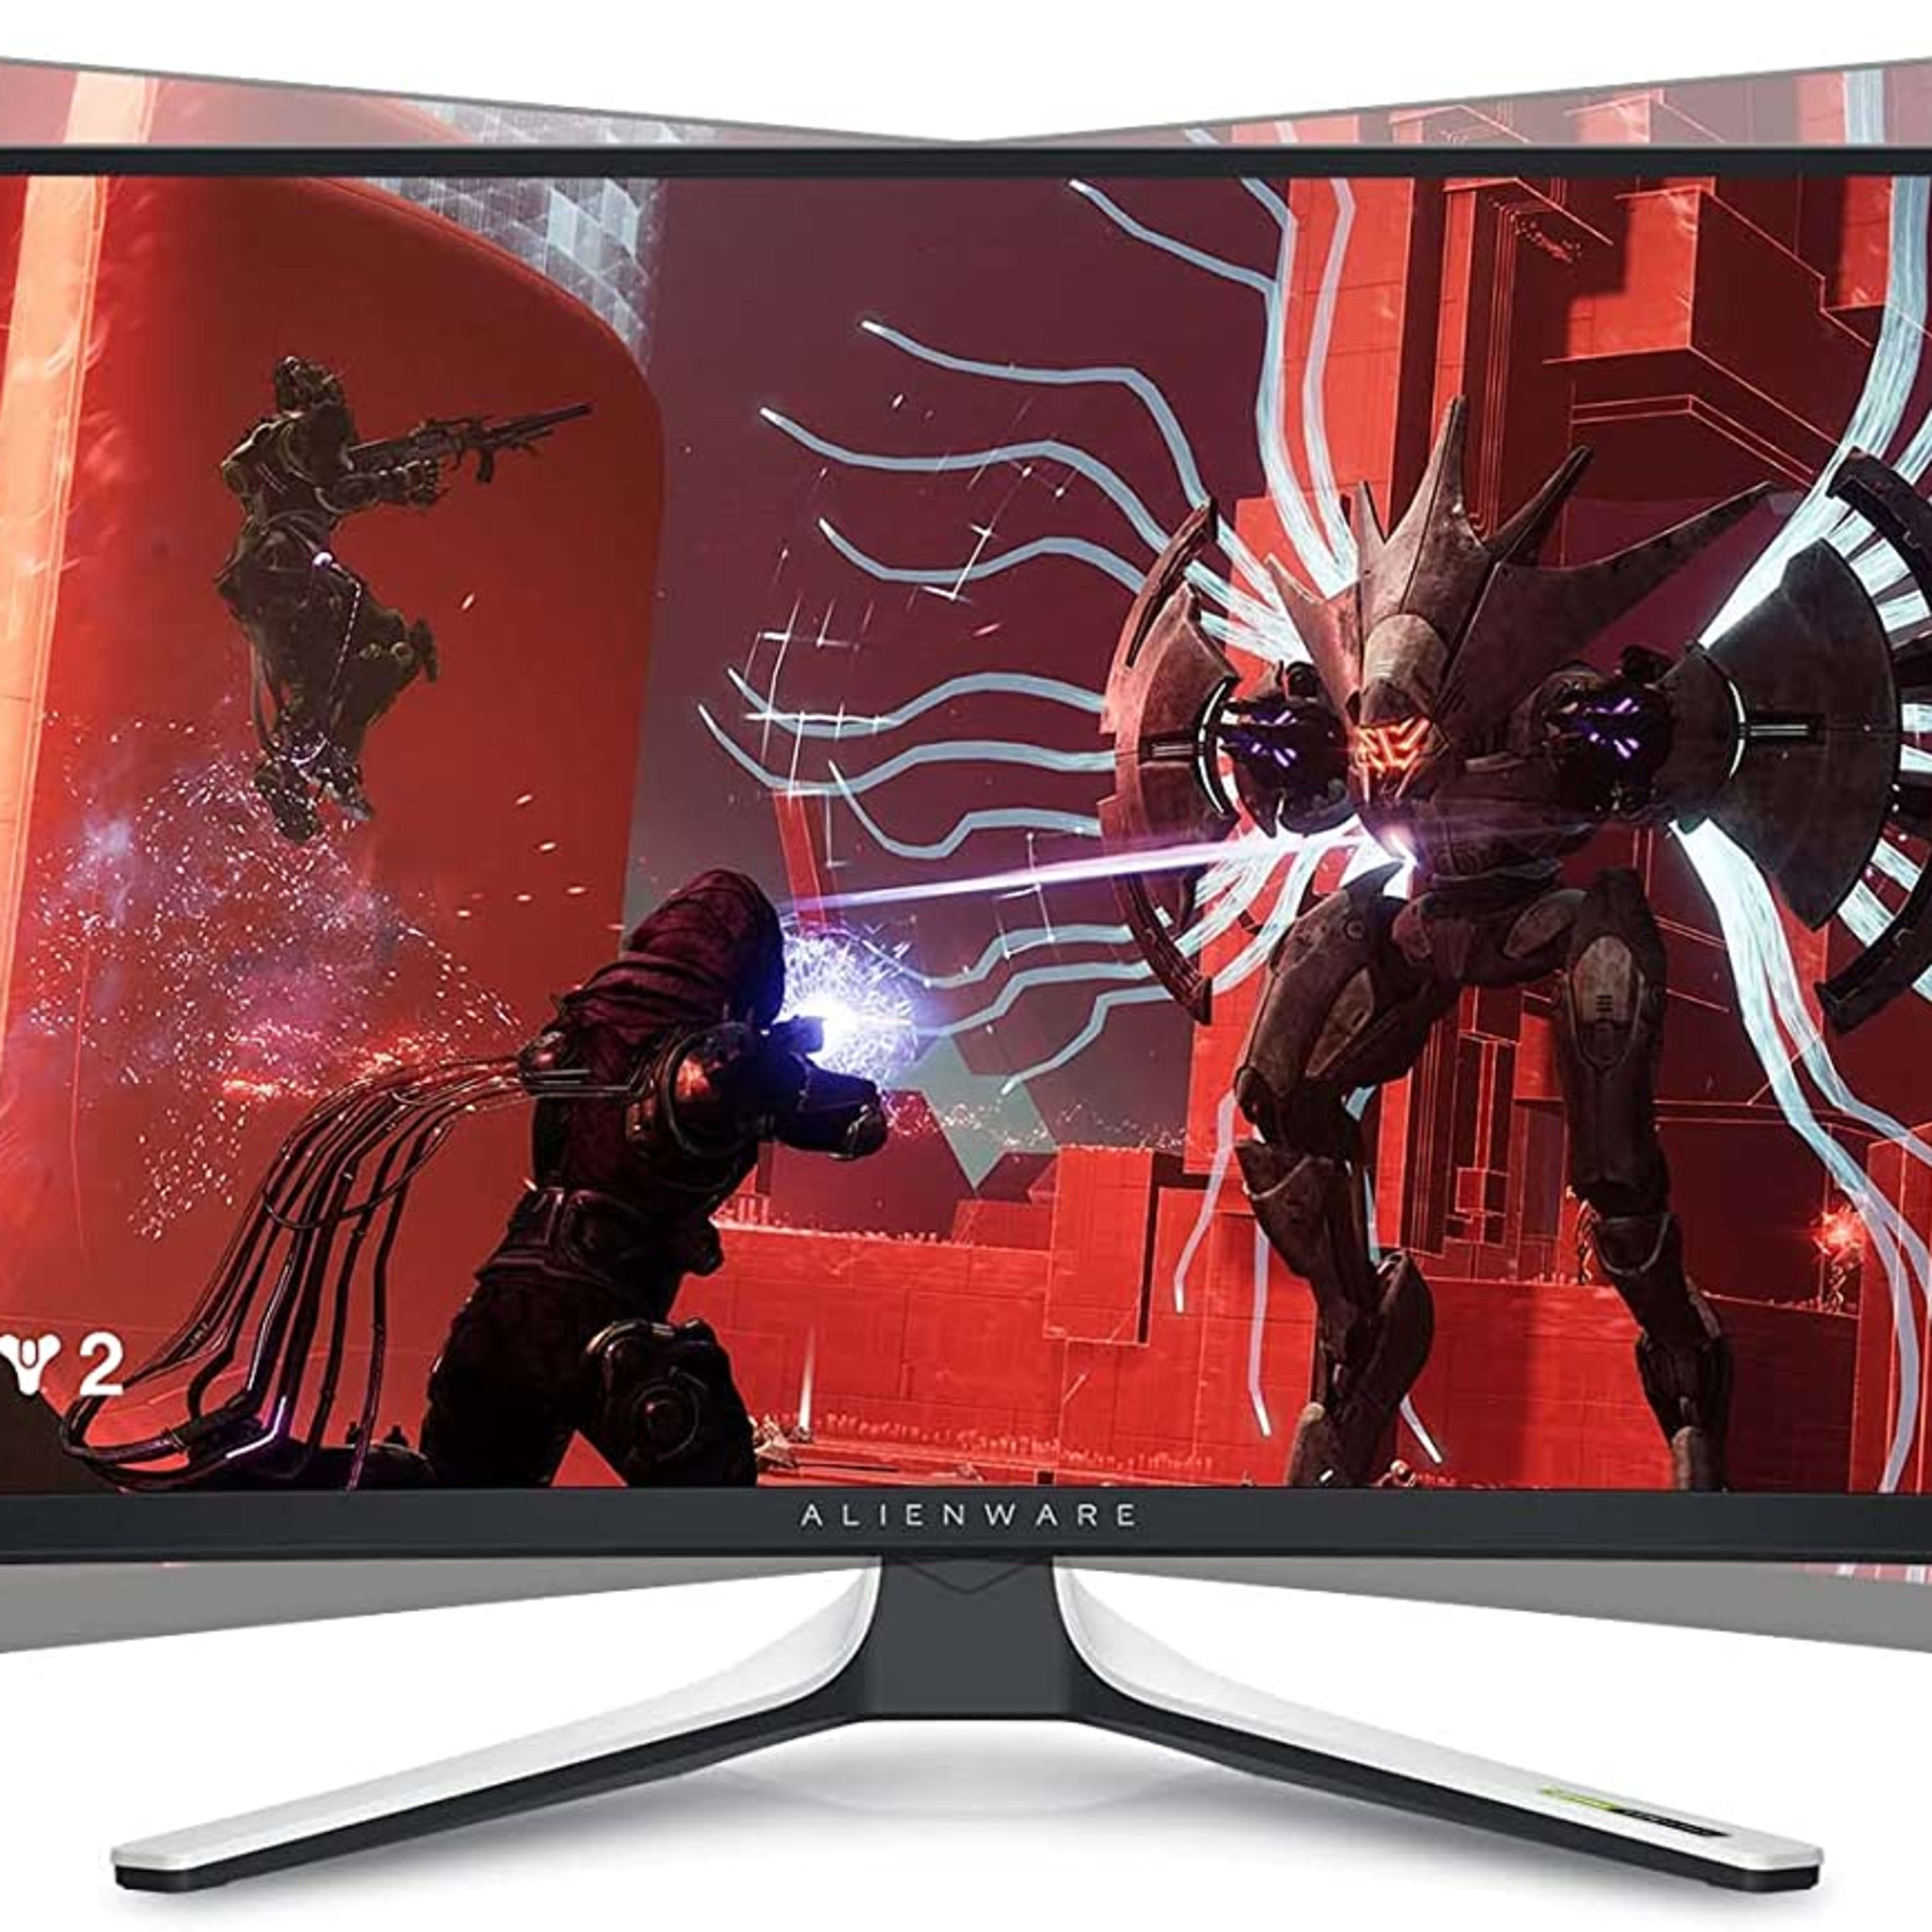 Alienware 34 Inch Curved OLED PC Gaming Monitor 